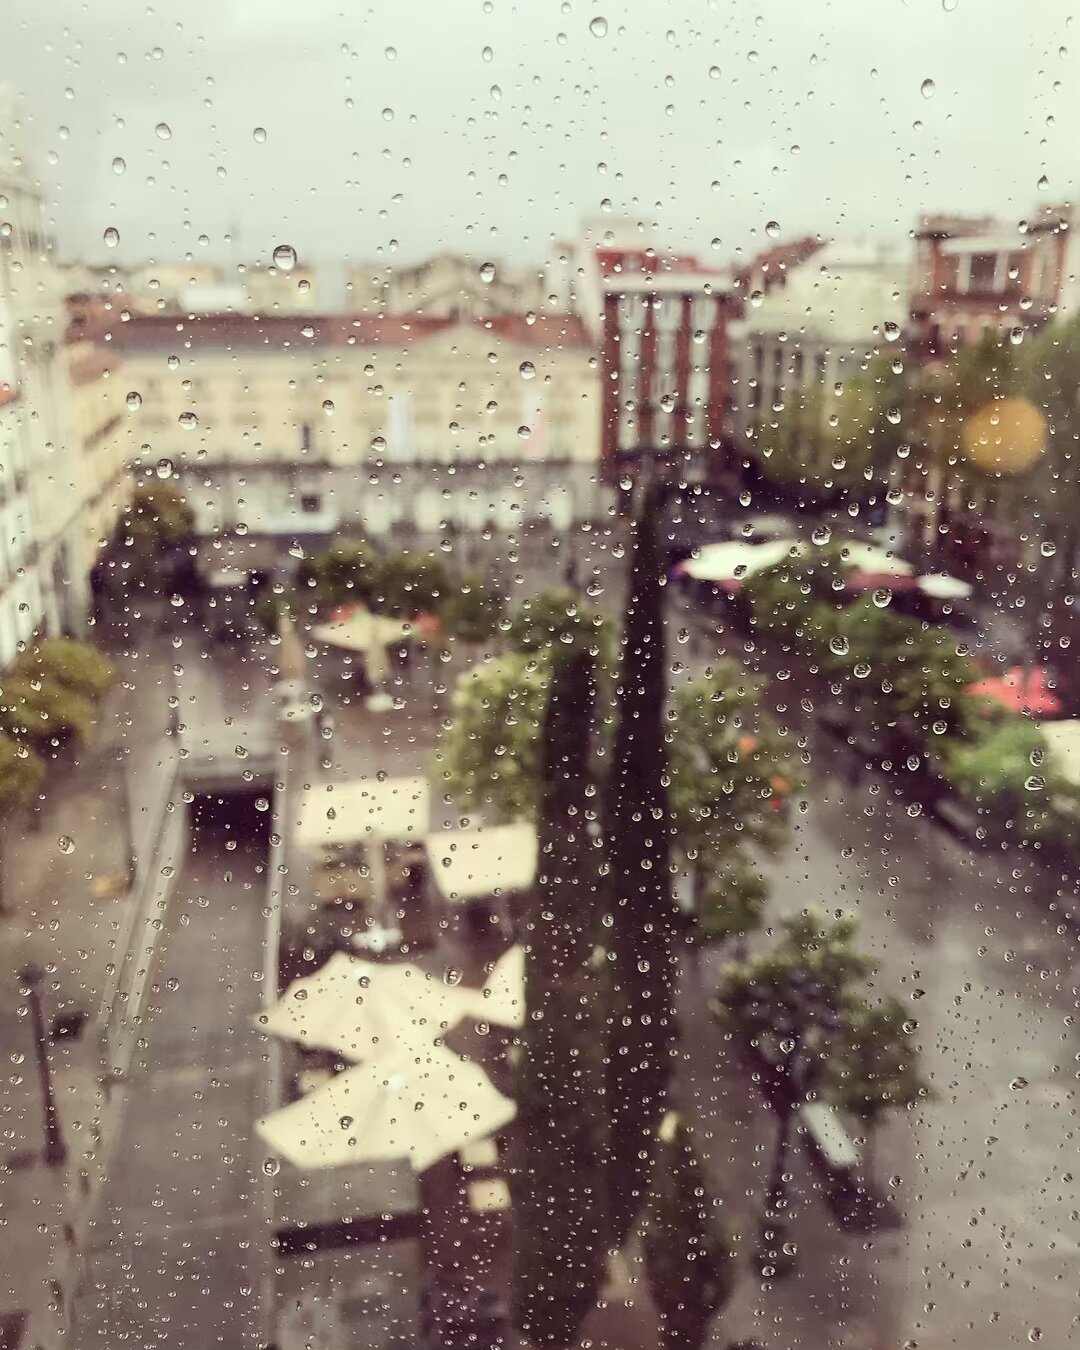 Overlooking Plaza Santa Ana in Madrid on a rainy afternoon. A relaxing spot my Dad used to visit often growing up. 🍷 🇪🇸